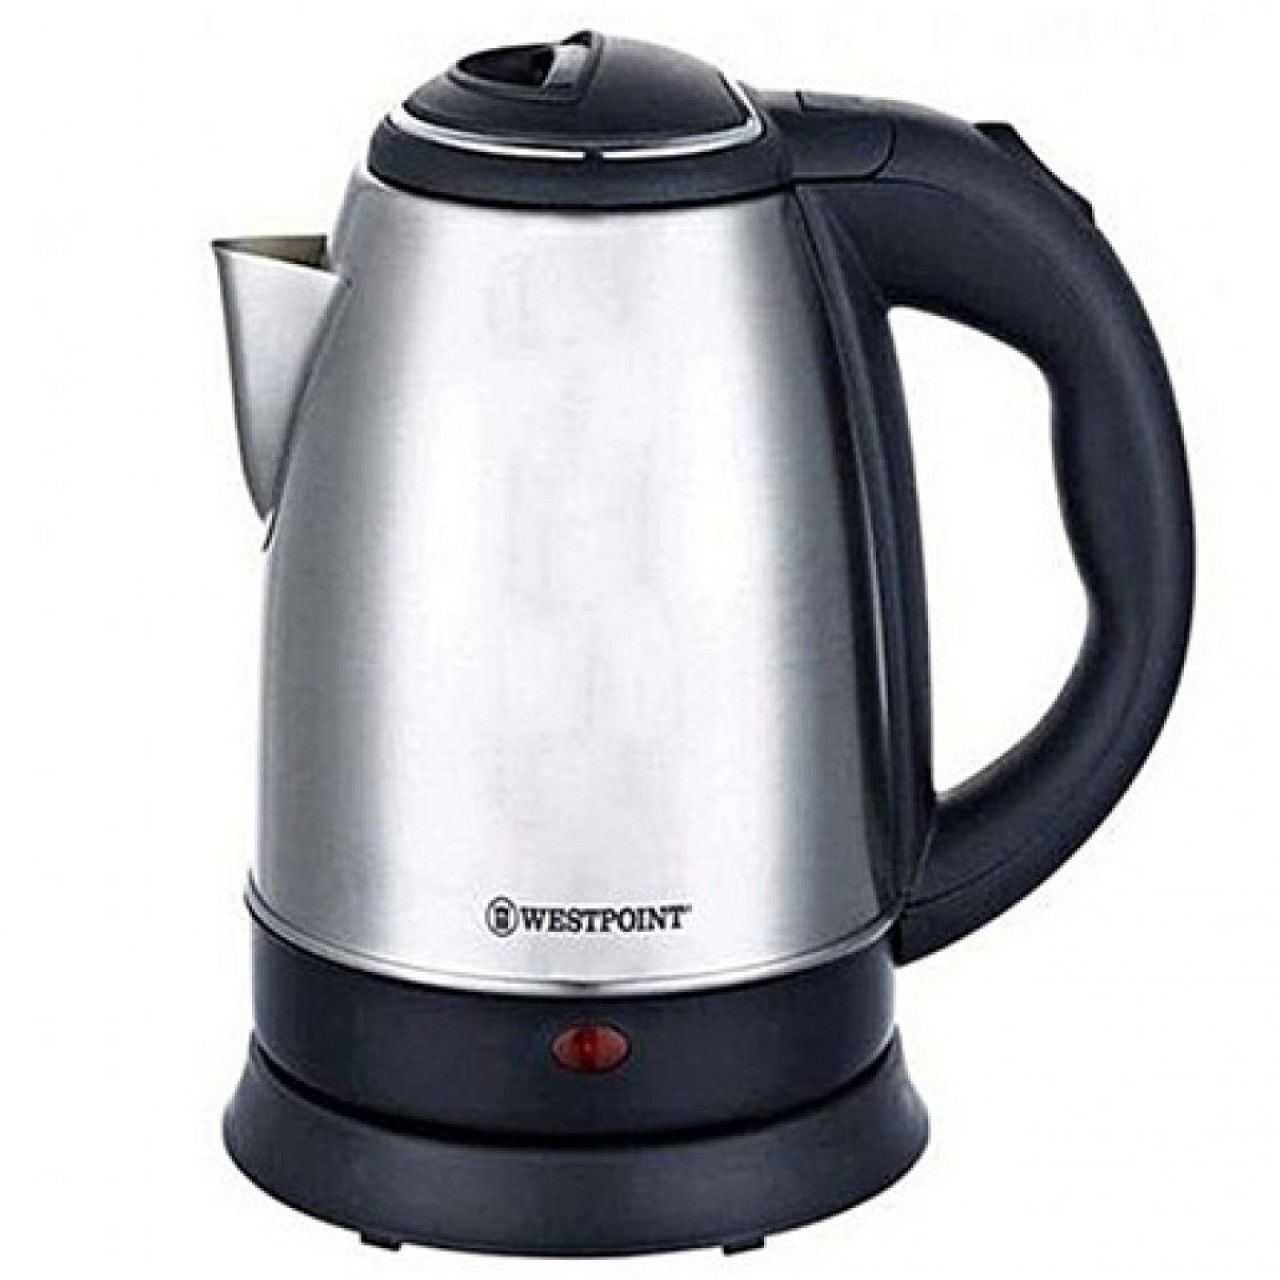 Westpoint WF-410 Cordless Electric Kettle - Capacity - 1 Litter